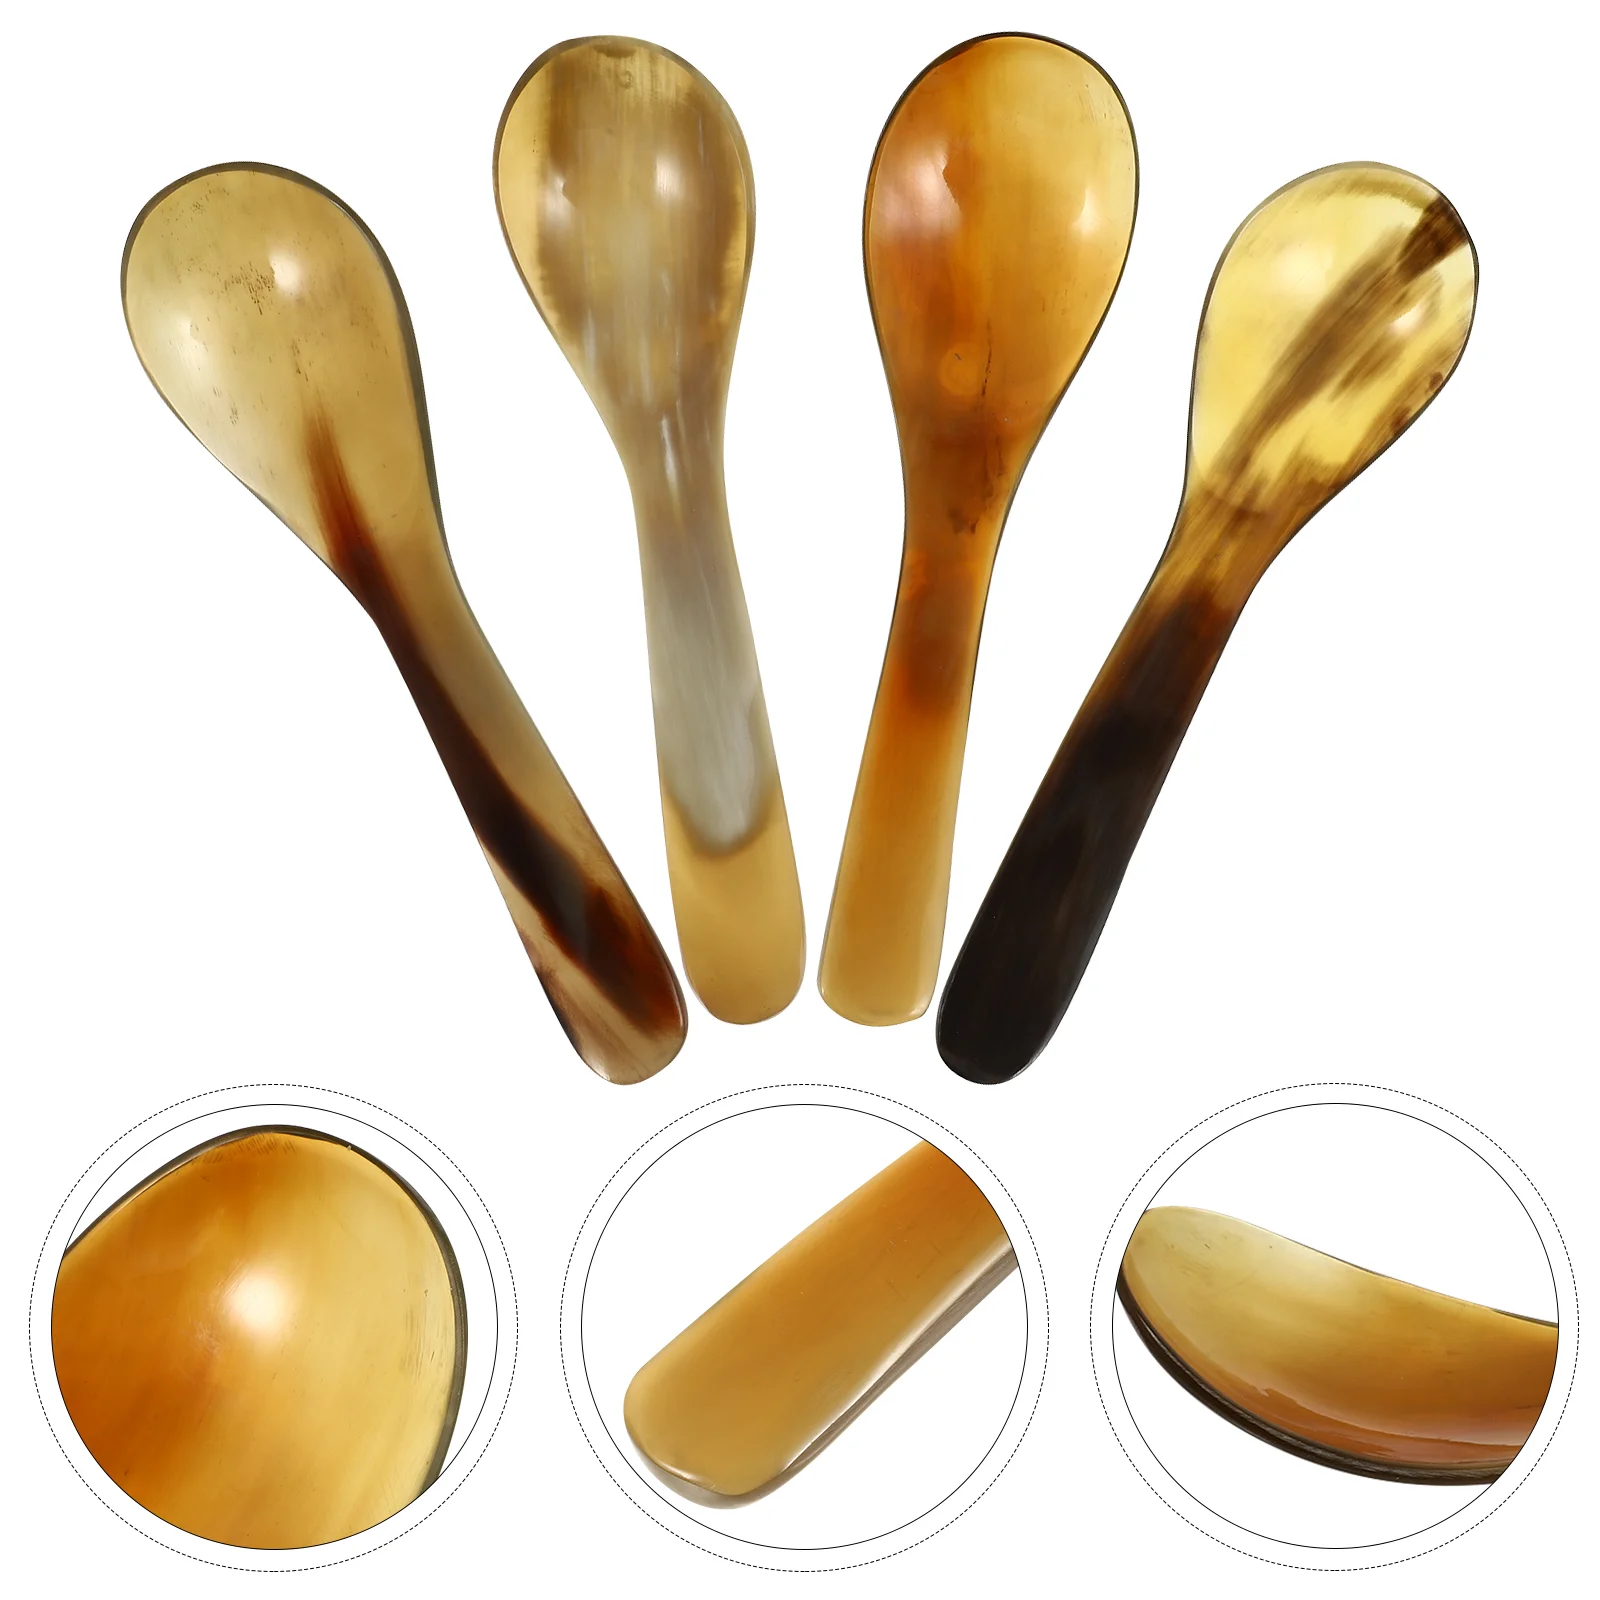 

4 Pcs Horn Coffee Spoon Ox Ice Cream Scoop Natural Mixing Spoons Soup Horns Dessert